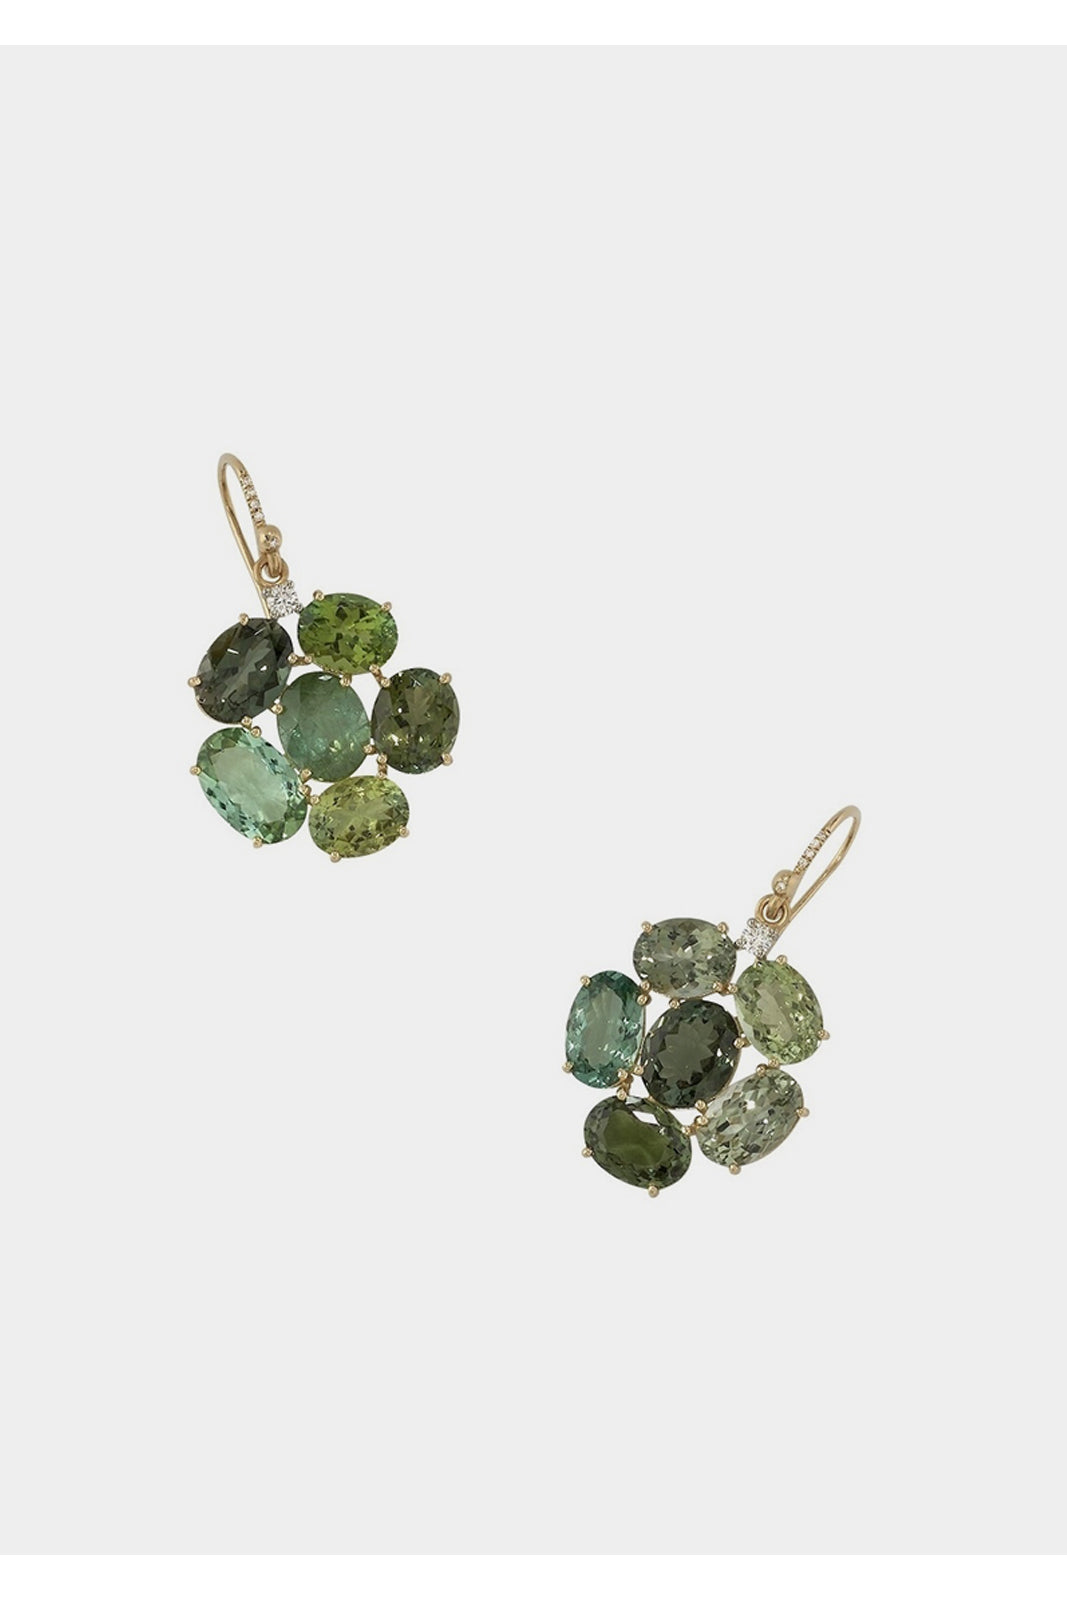 18K Yellow and White Gold Earrings Set with Green Tourmaline and Full Cut Diamonds on Diamond Pavé Hooks